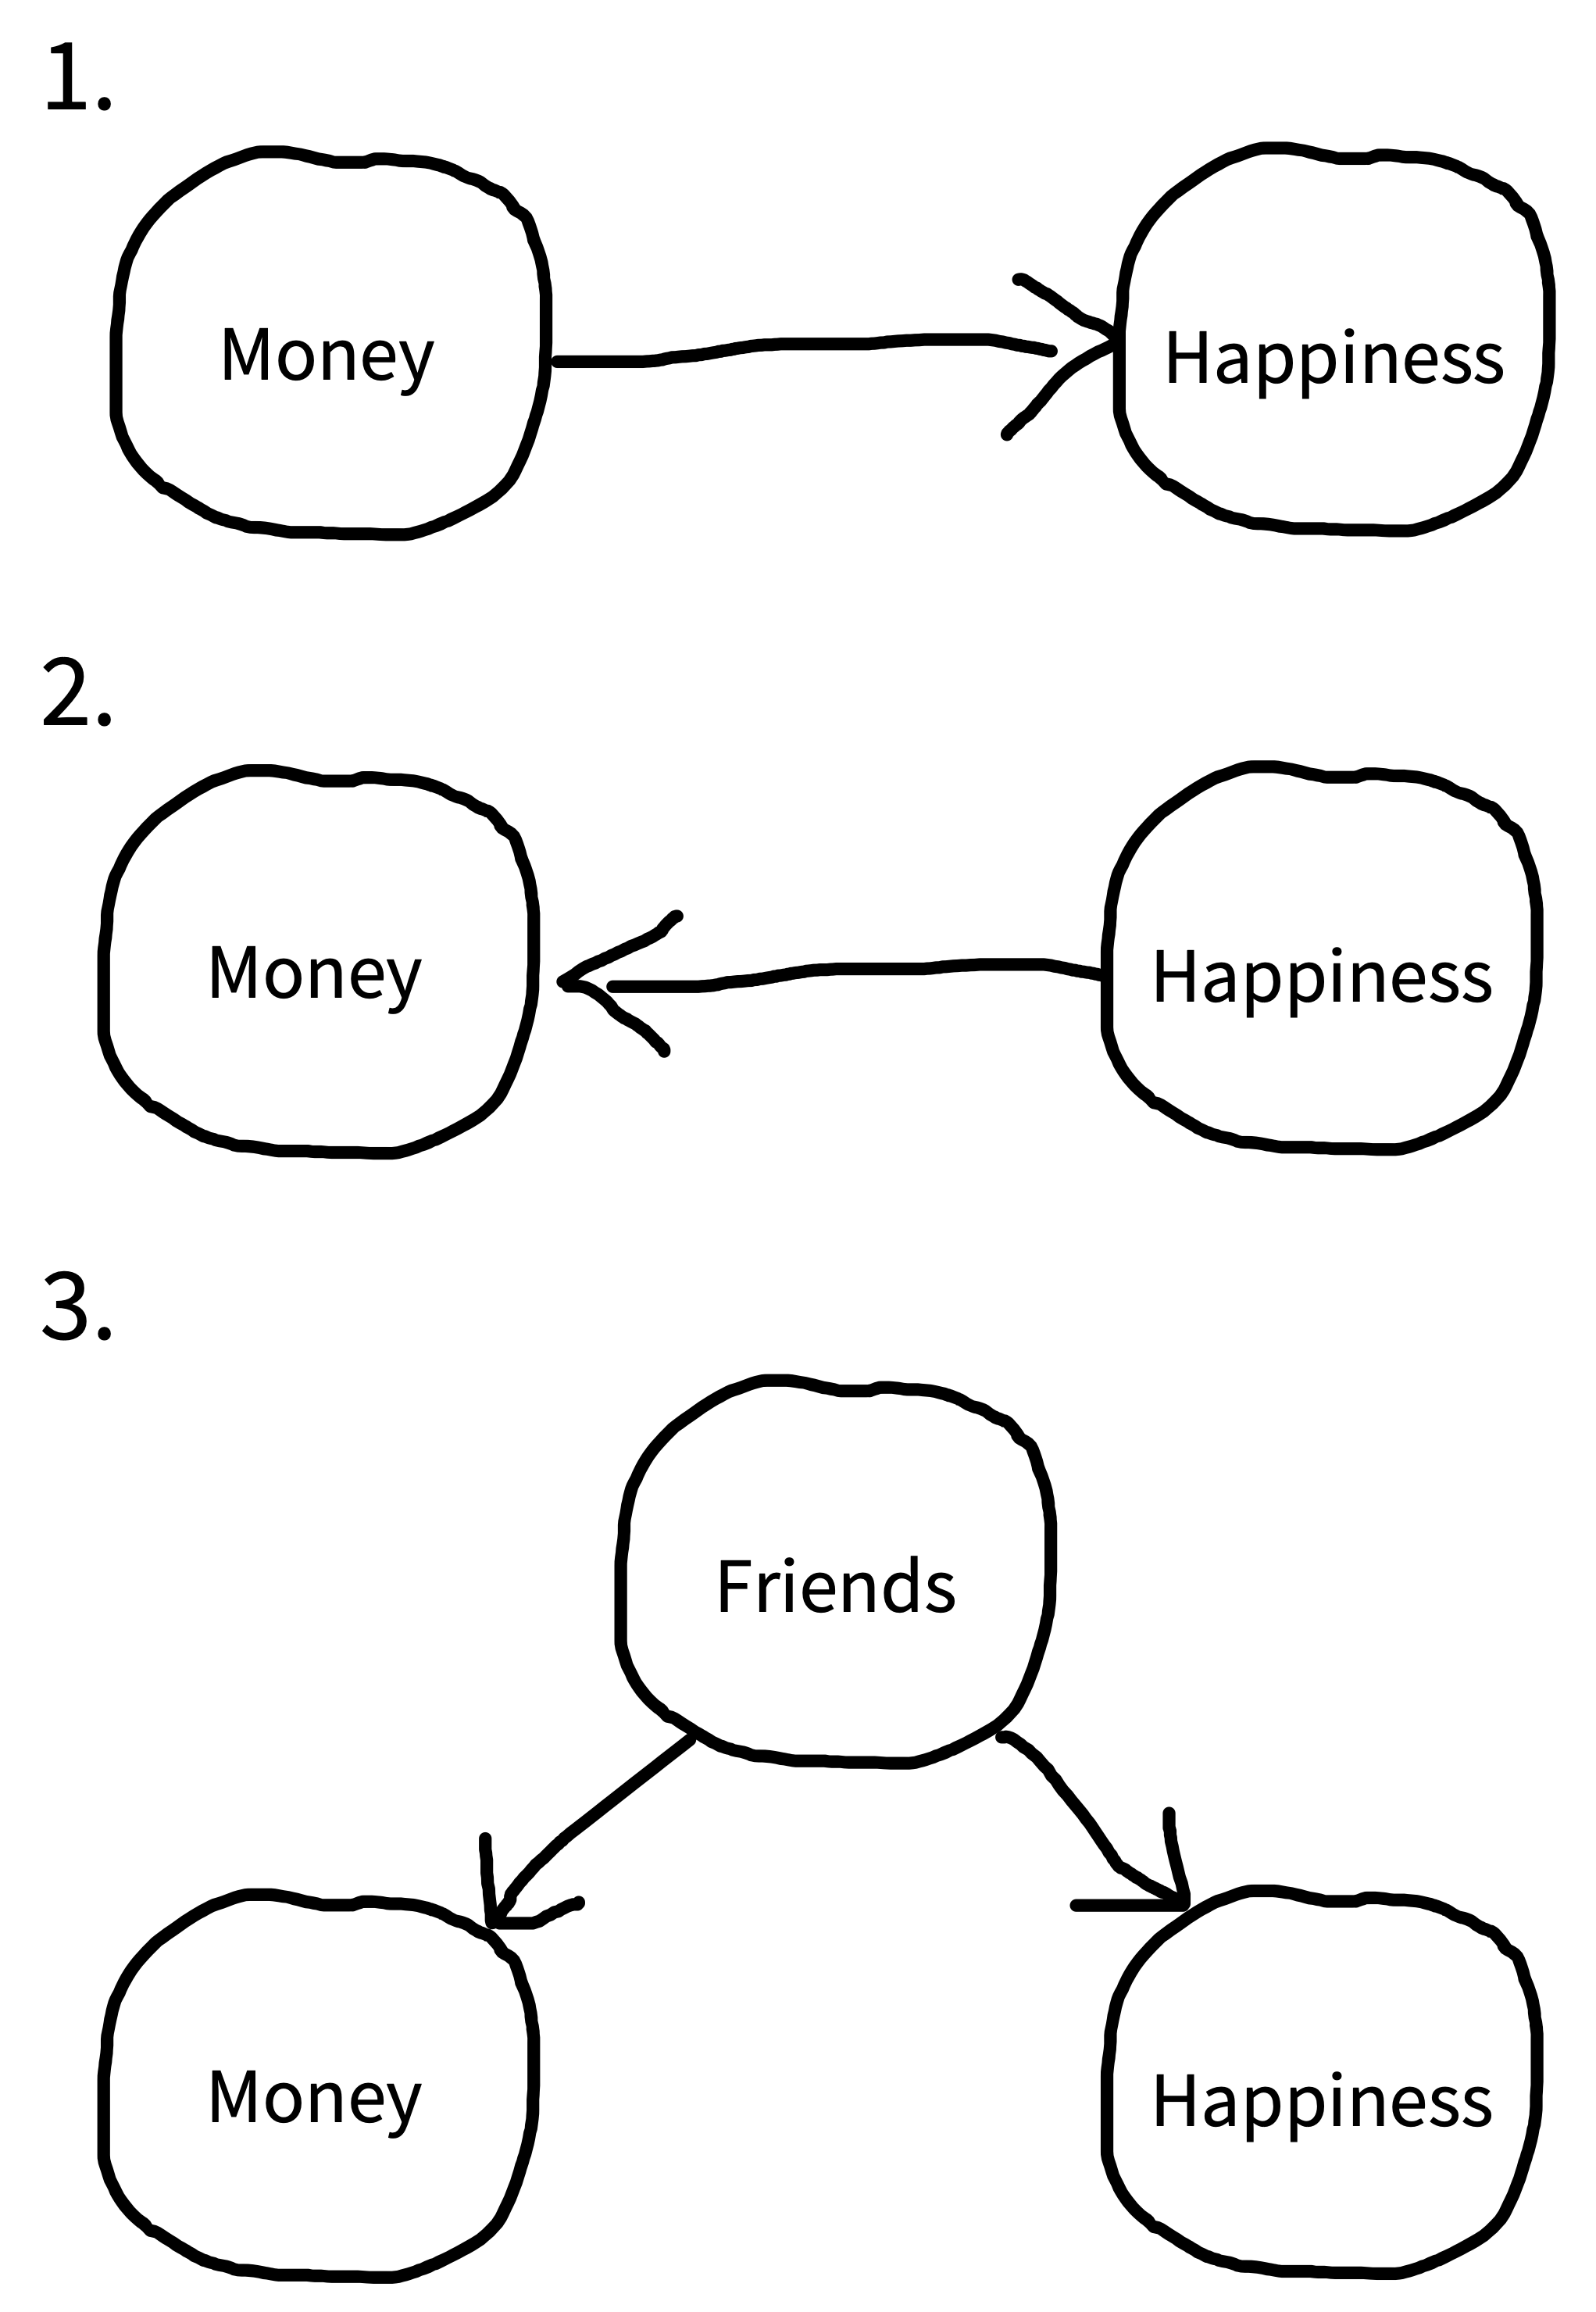 Three reasons why money and happiness can be correlated.